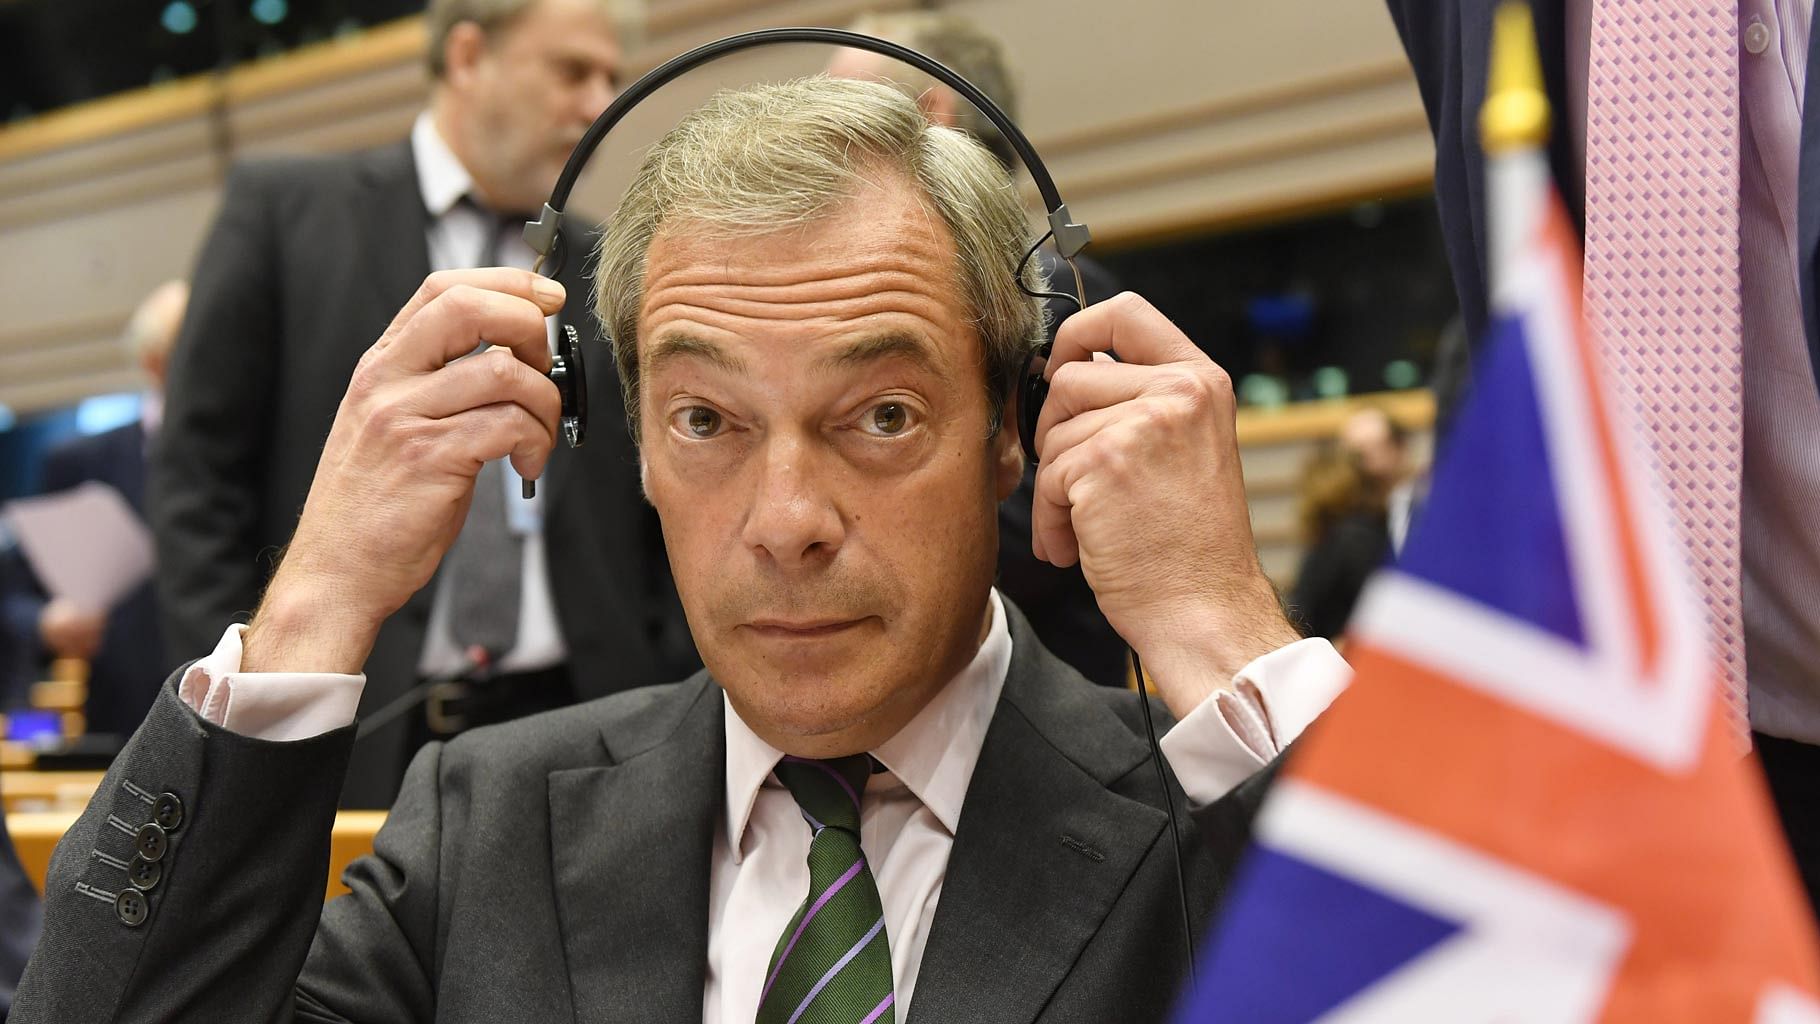 Leader of the UKIP Nigel Farage during a special session of European Parliament in Brussels on 28 June. (Photo: AP)